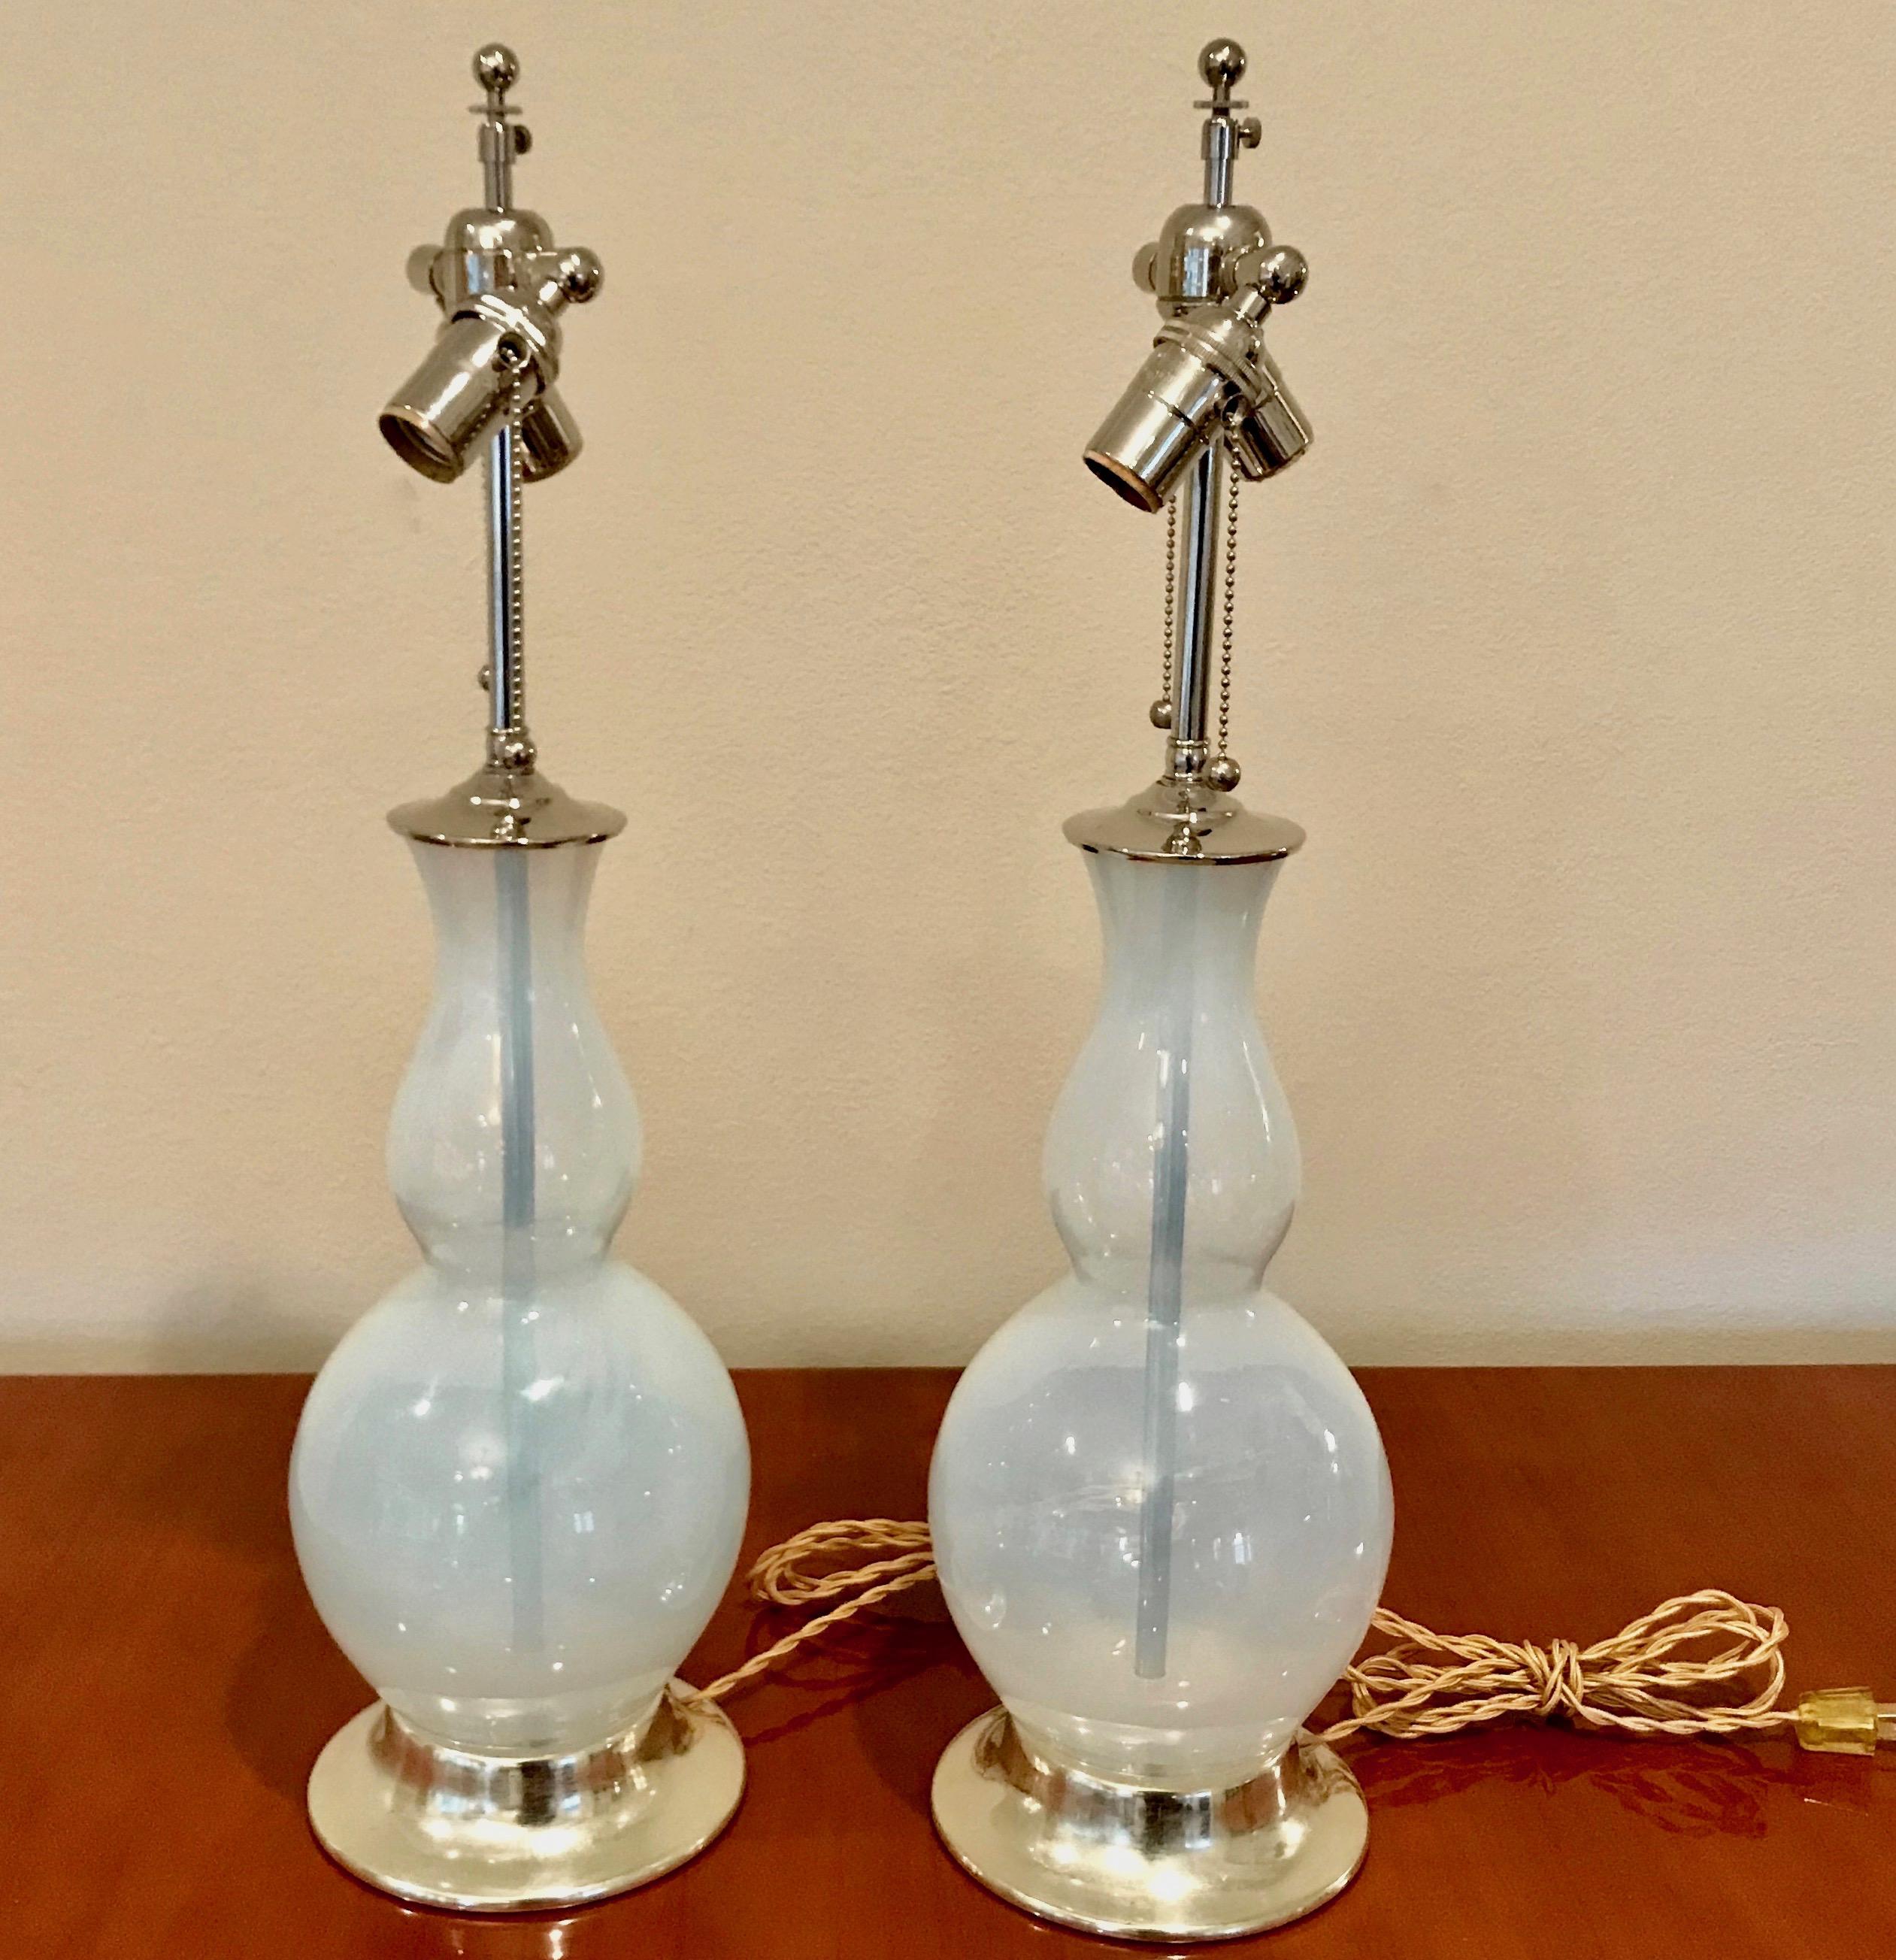 Italian Pair of Opalesent Murano Glass Lamps on White Gold Turned Wood Bases